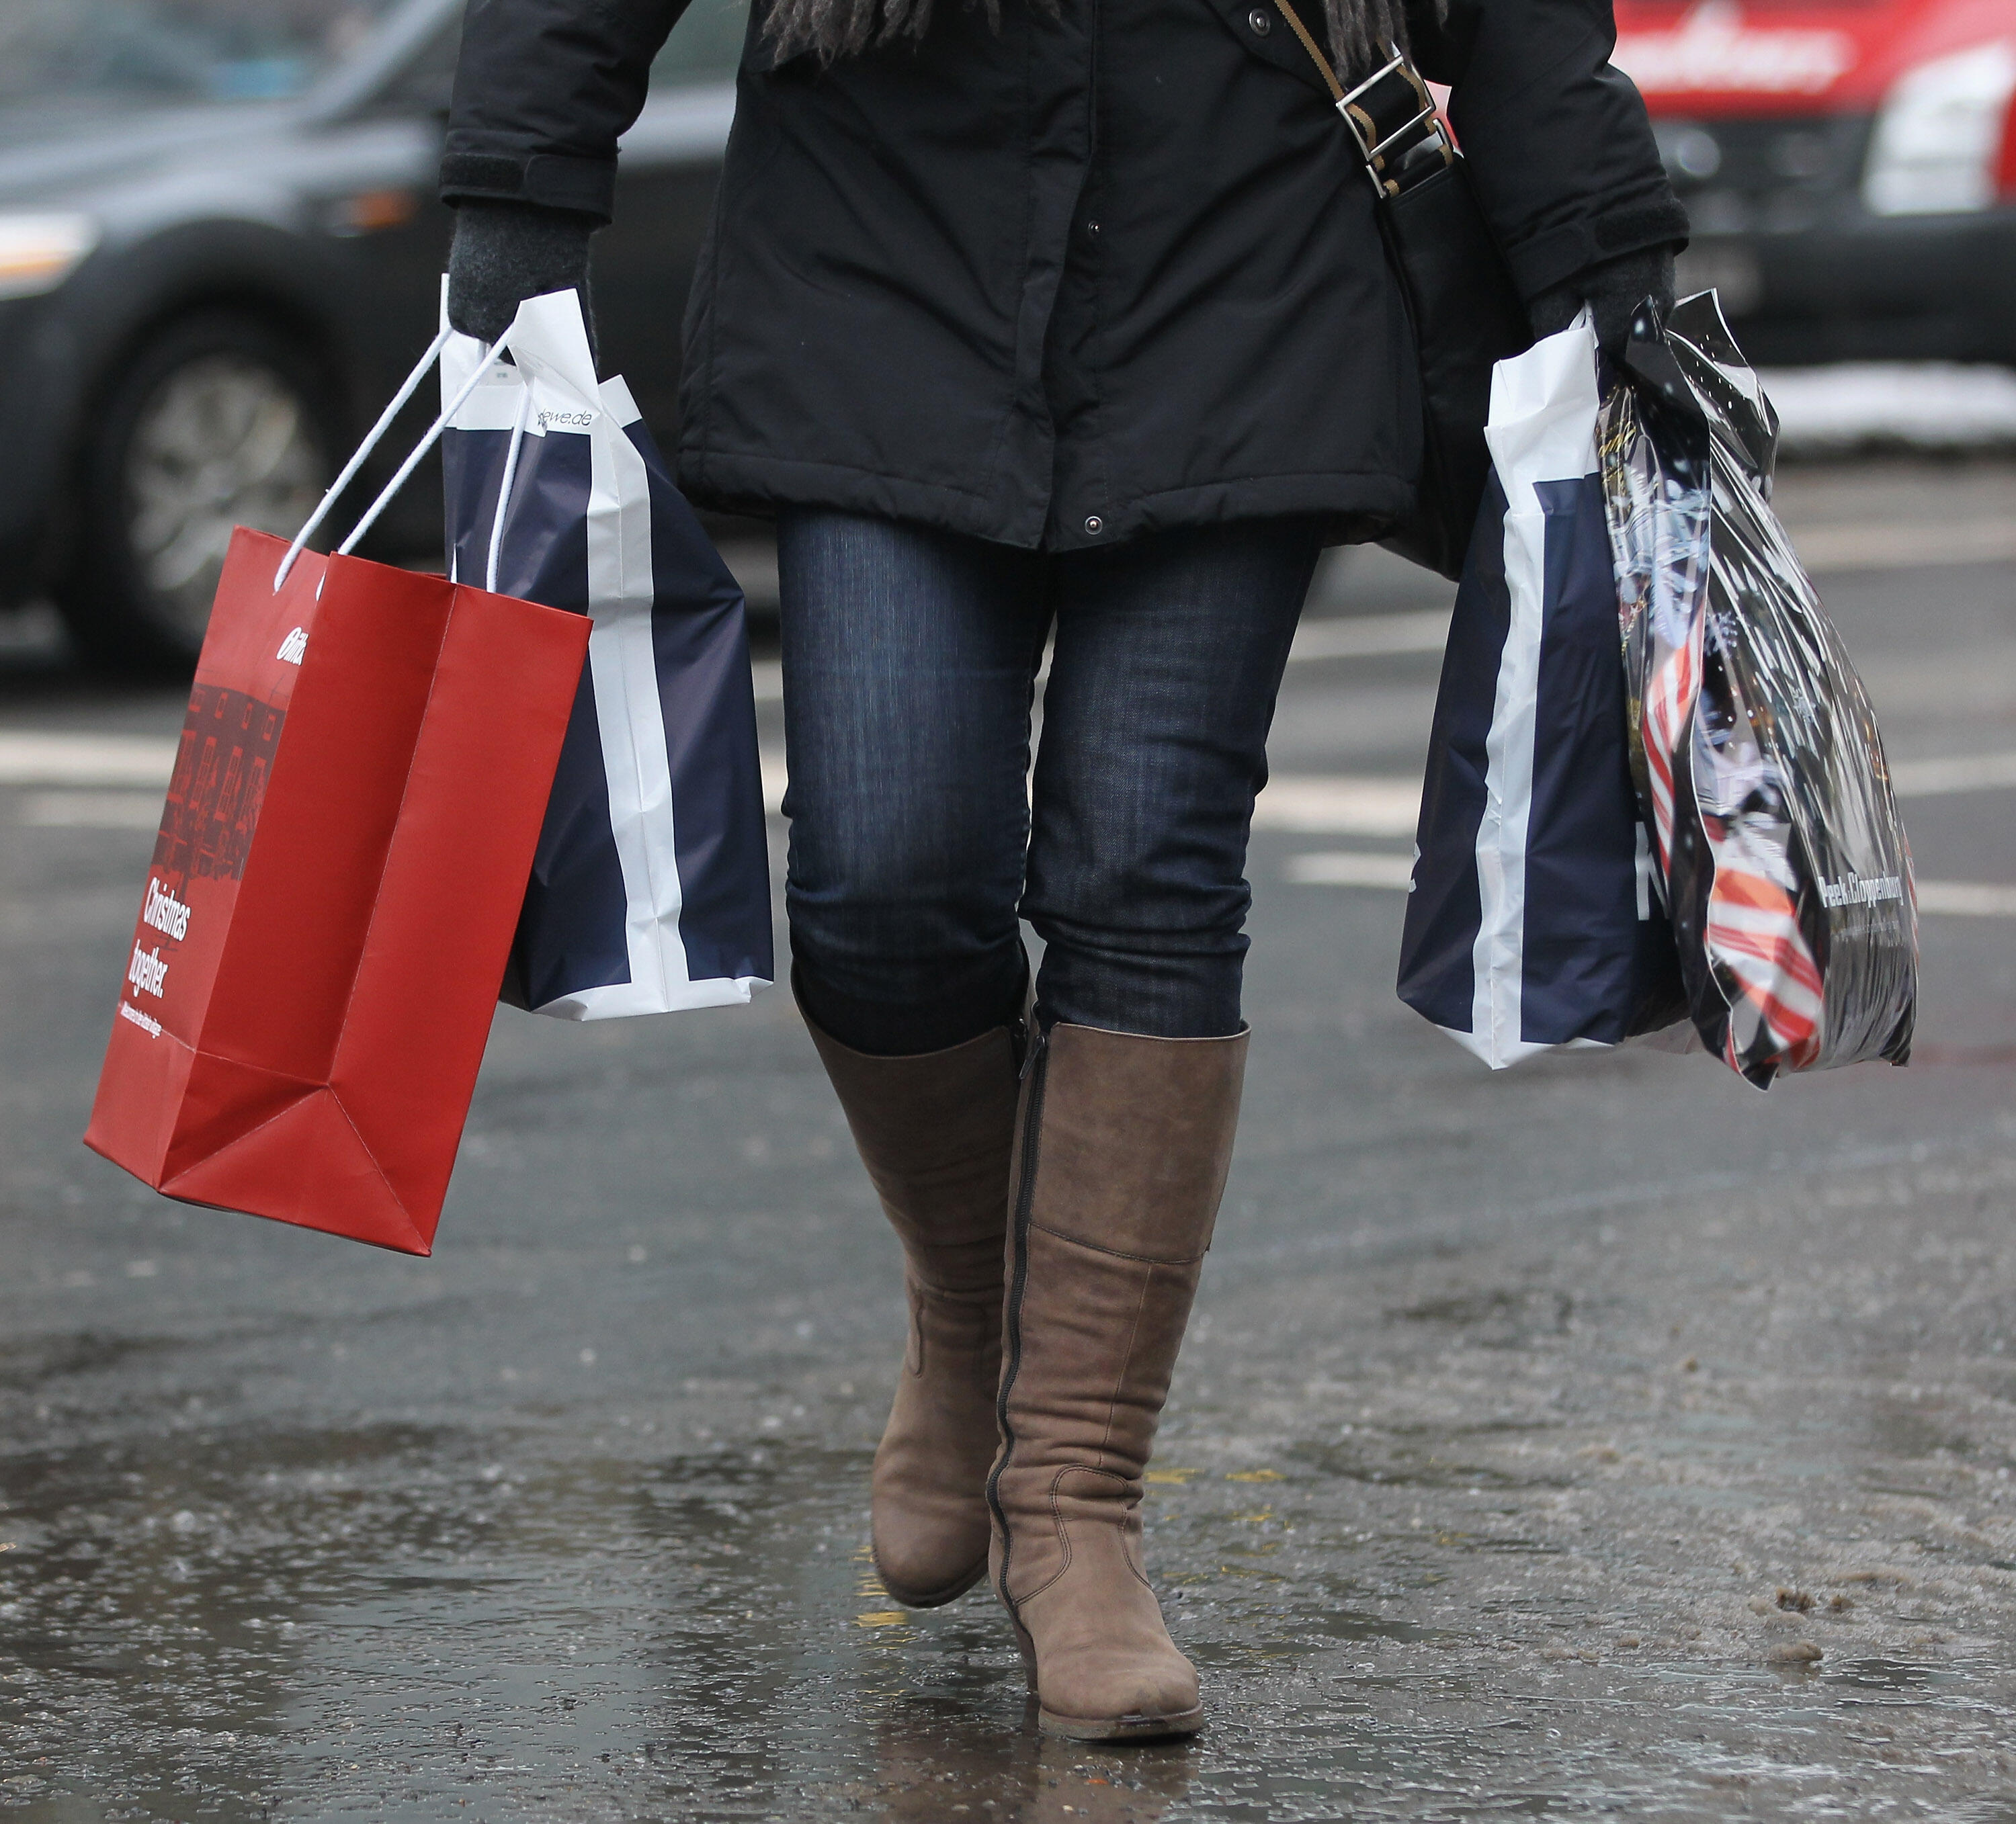 BERLIN, GERMANY - DECEMBER 22:  A woman carries shopping bags two days before Christmas on December 22, 2010 in Berlin, Germany. German retailers have announced strong Christmas sales that are coming on the heels of a robust German economic recovery from 